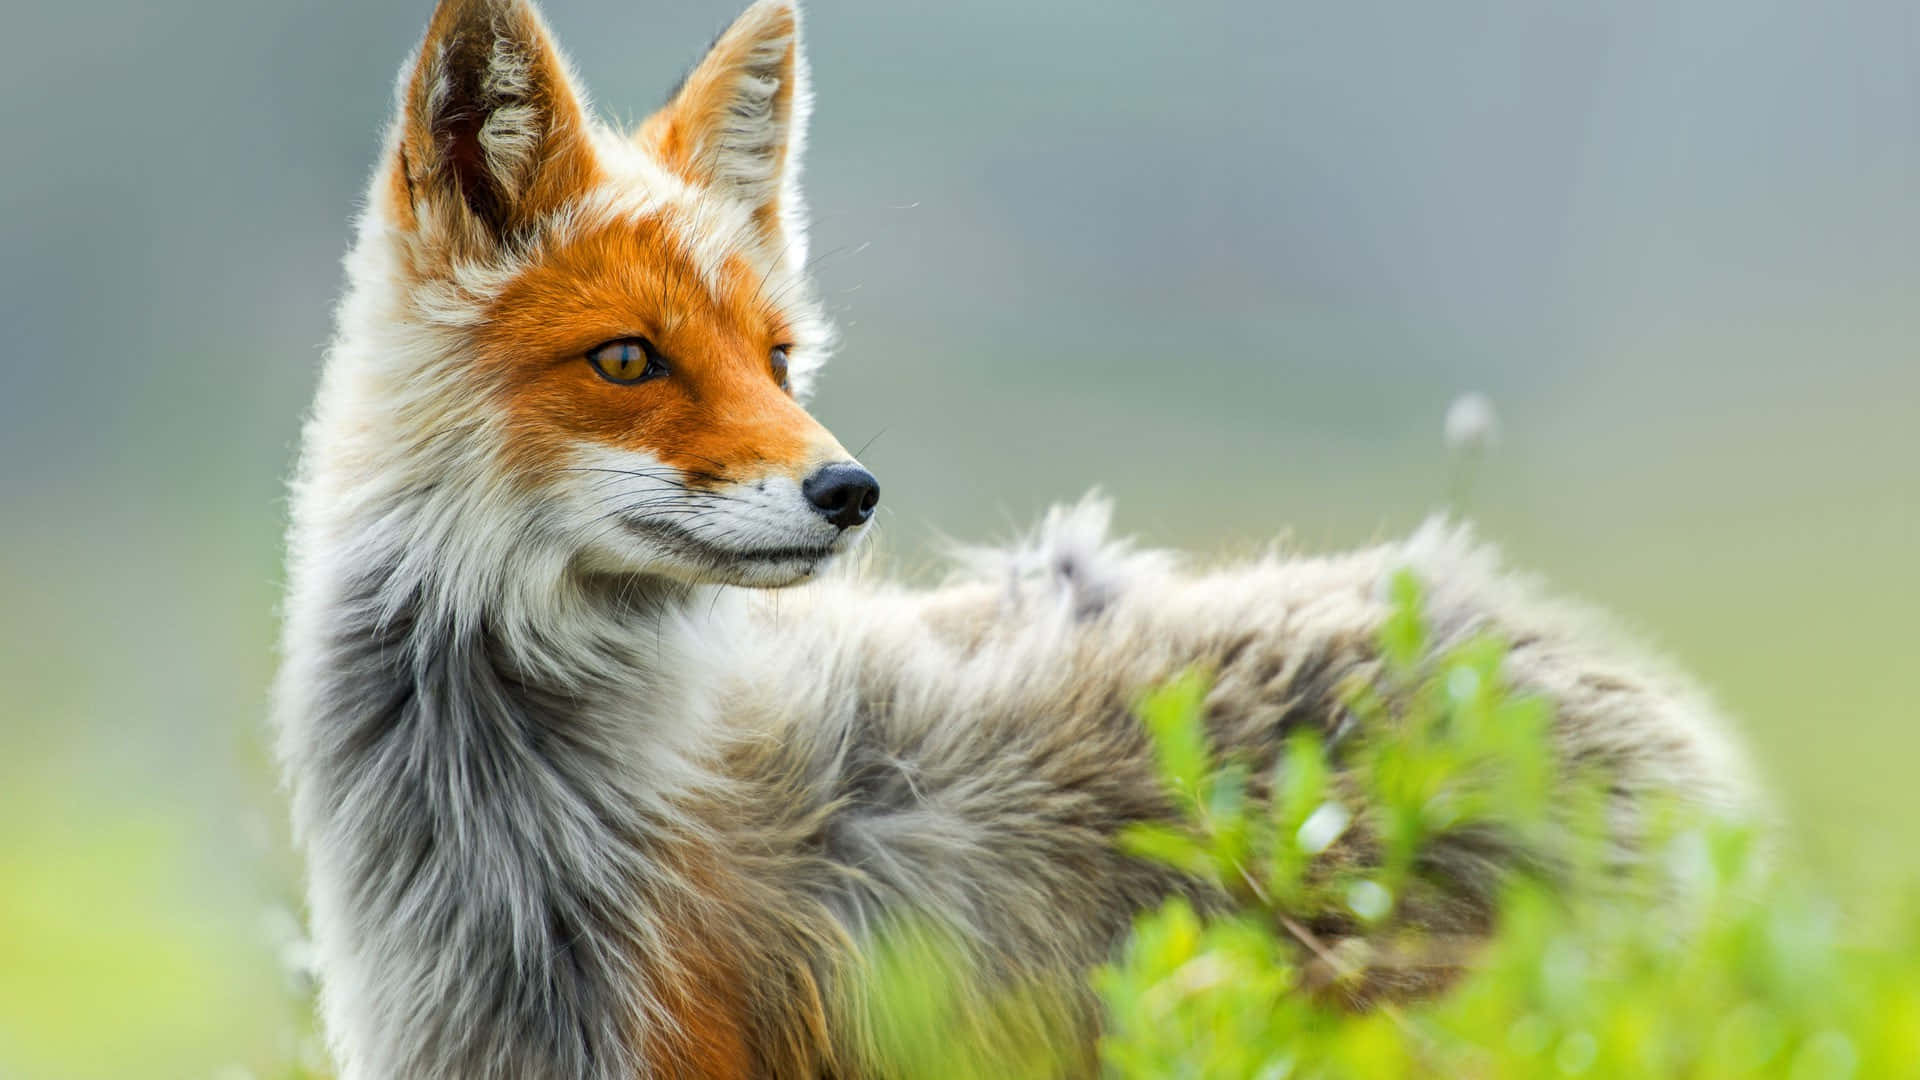 A Red Fox Is Standing In The Grass Wallpaper